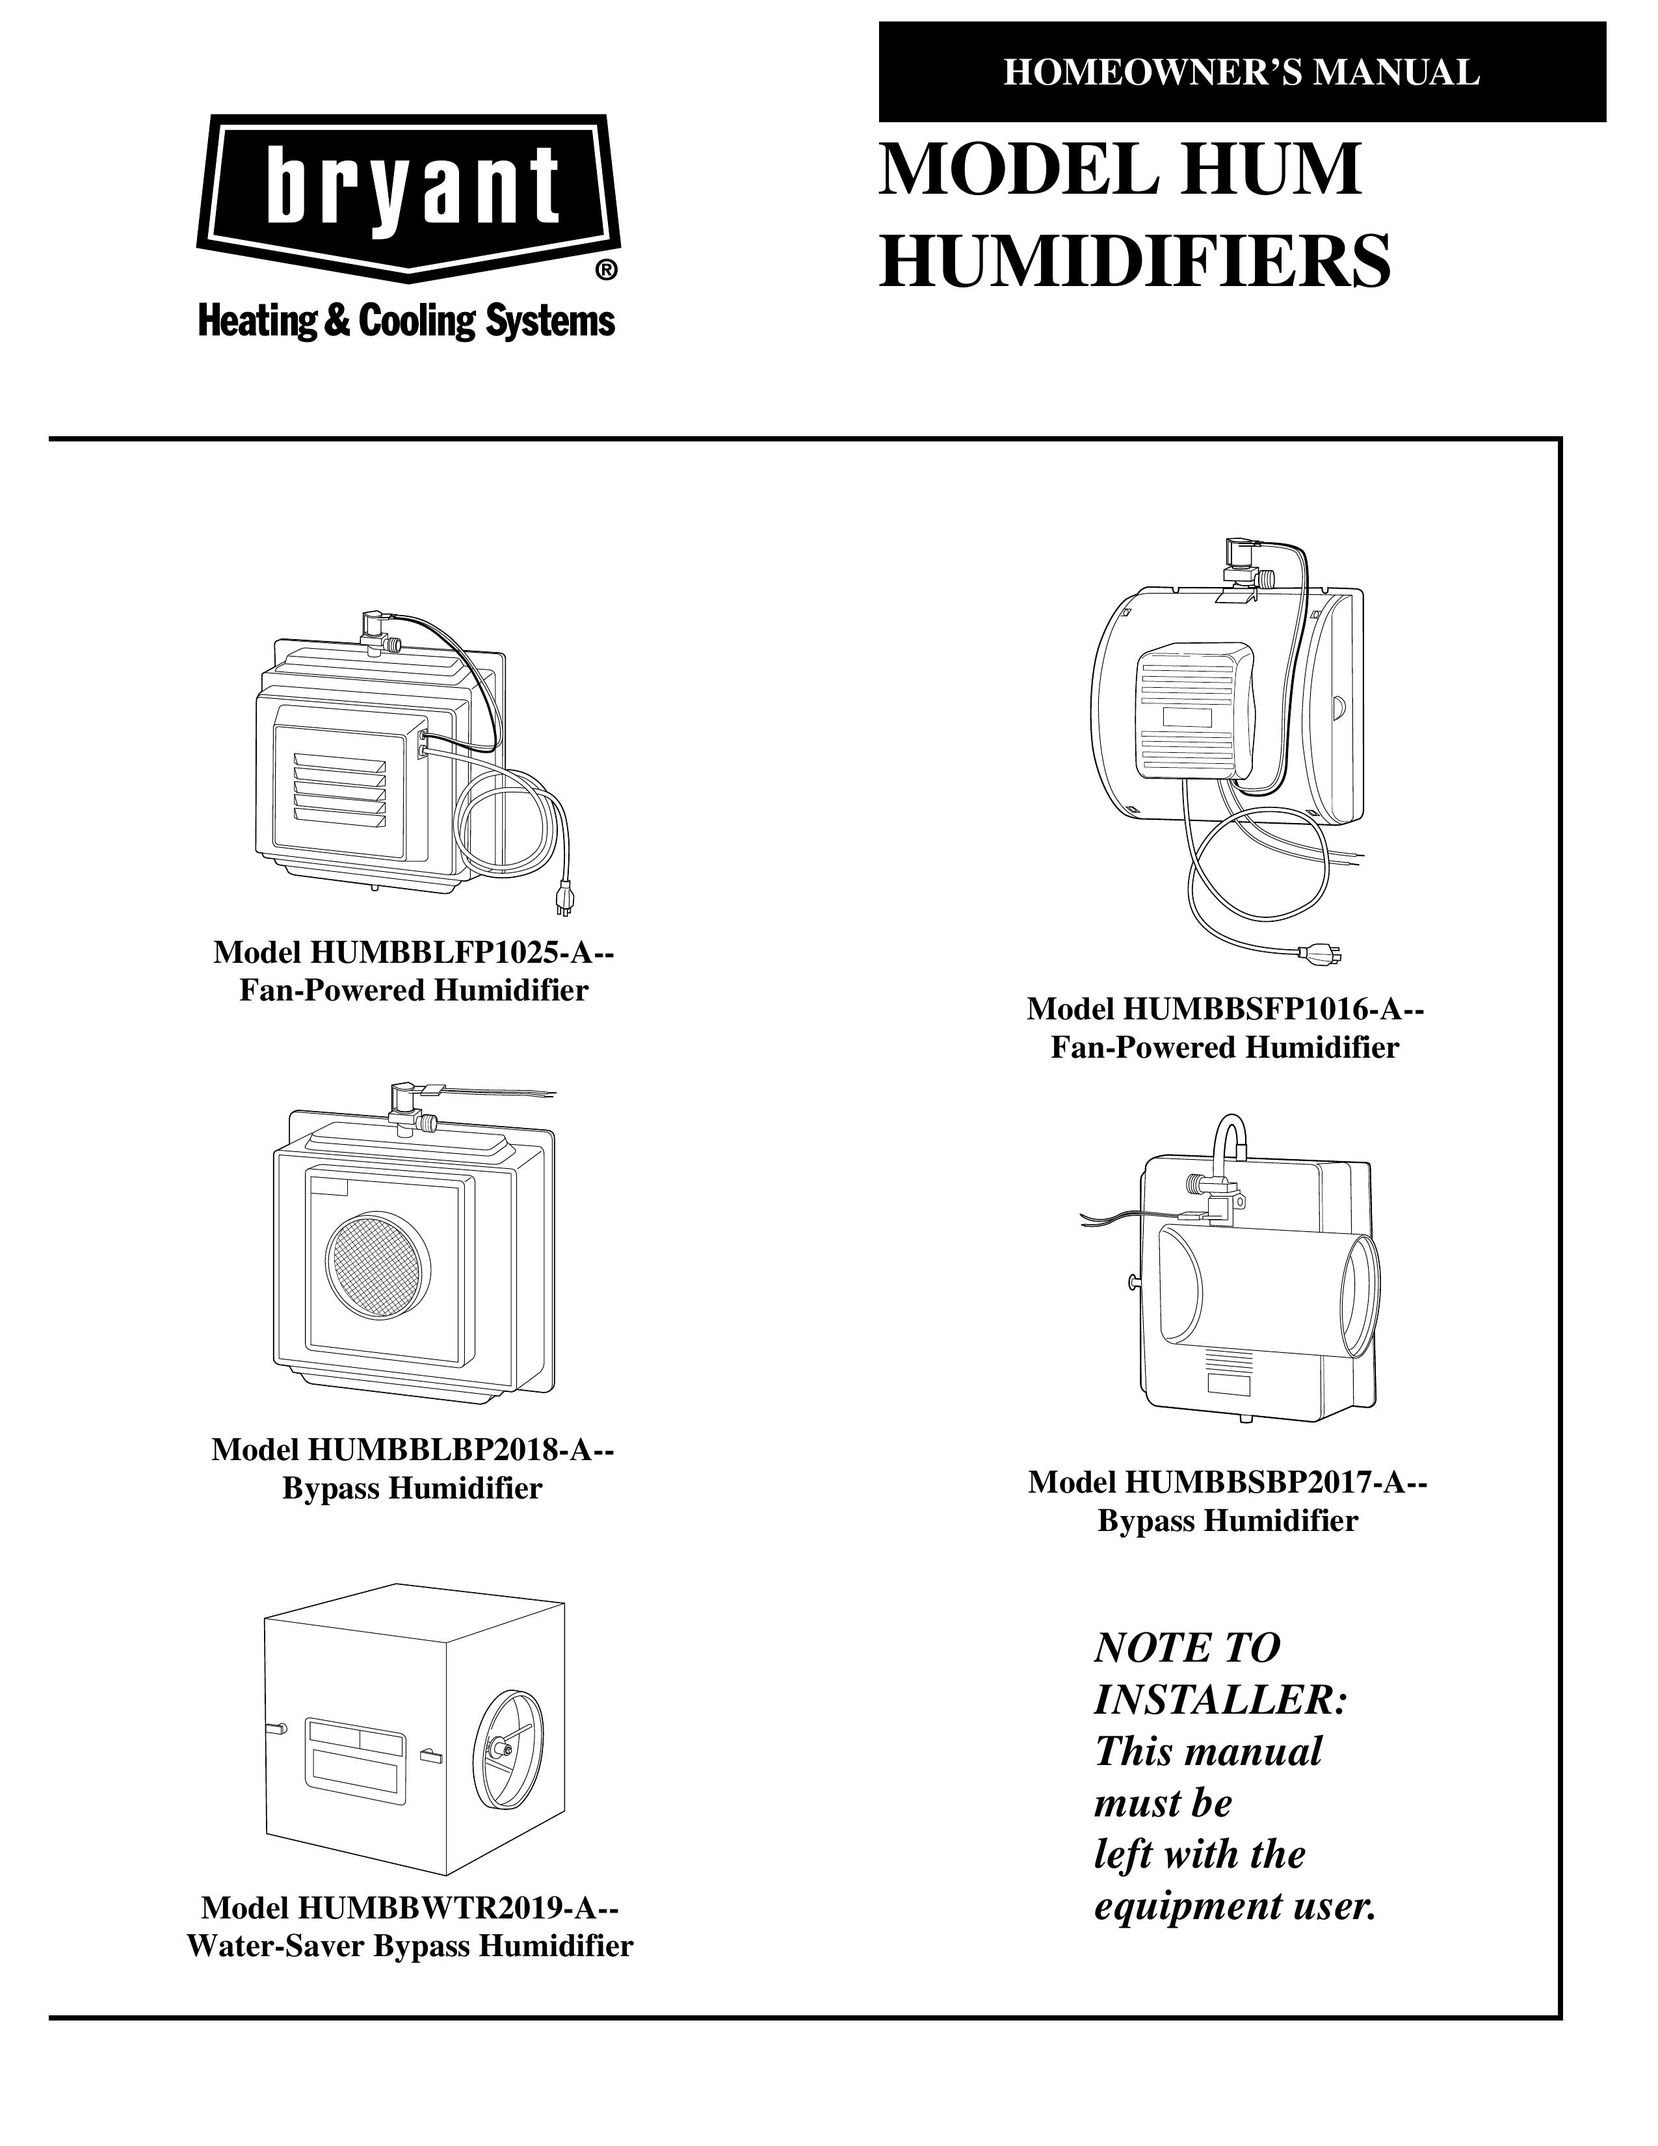 Bryant HUMBBLFP1025-A Humidifier User Manual